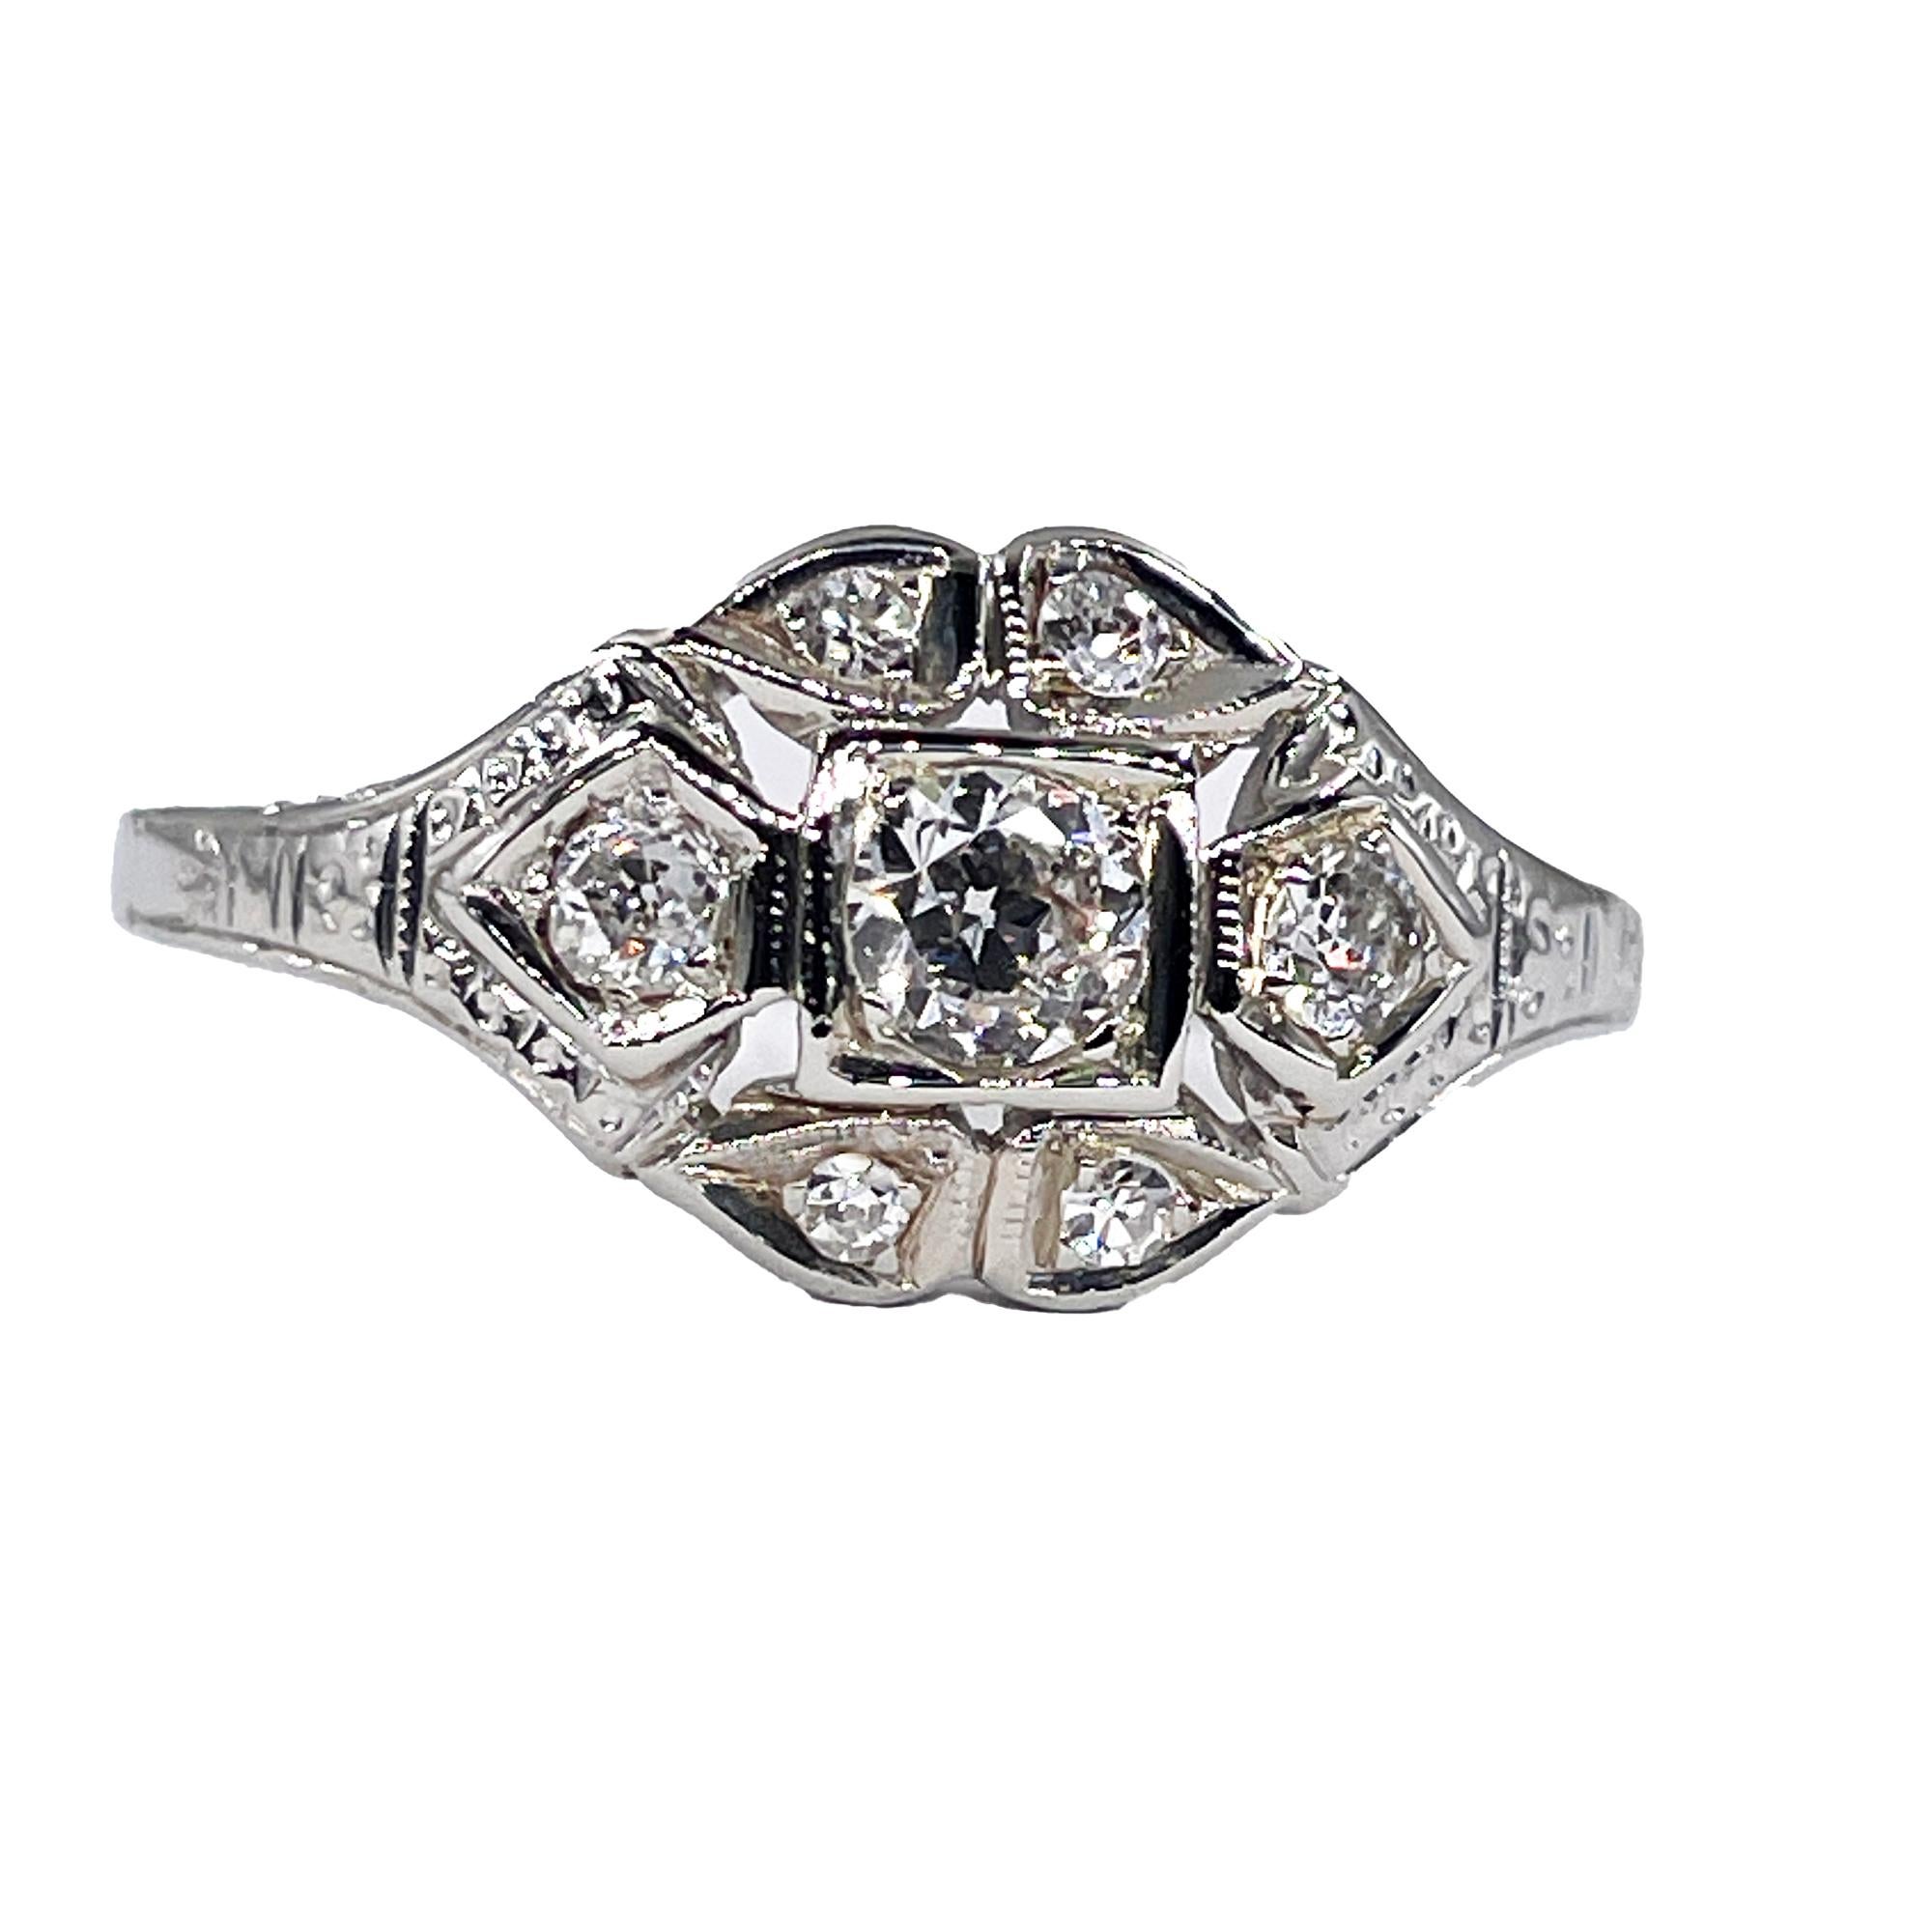 This Authentic 1930s vintage engagement ring incorporates the gleaming precious metal with an artistic grace and beauty that transcends specific Art Deco style.

The stylized cigar-band style ring gently curves around and hugs your finger and